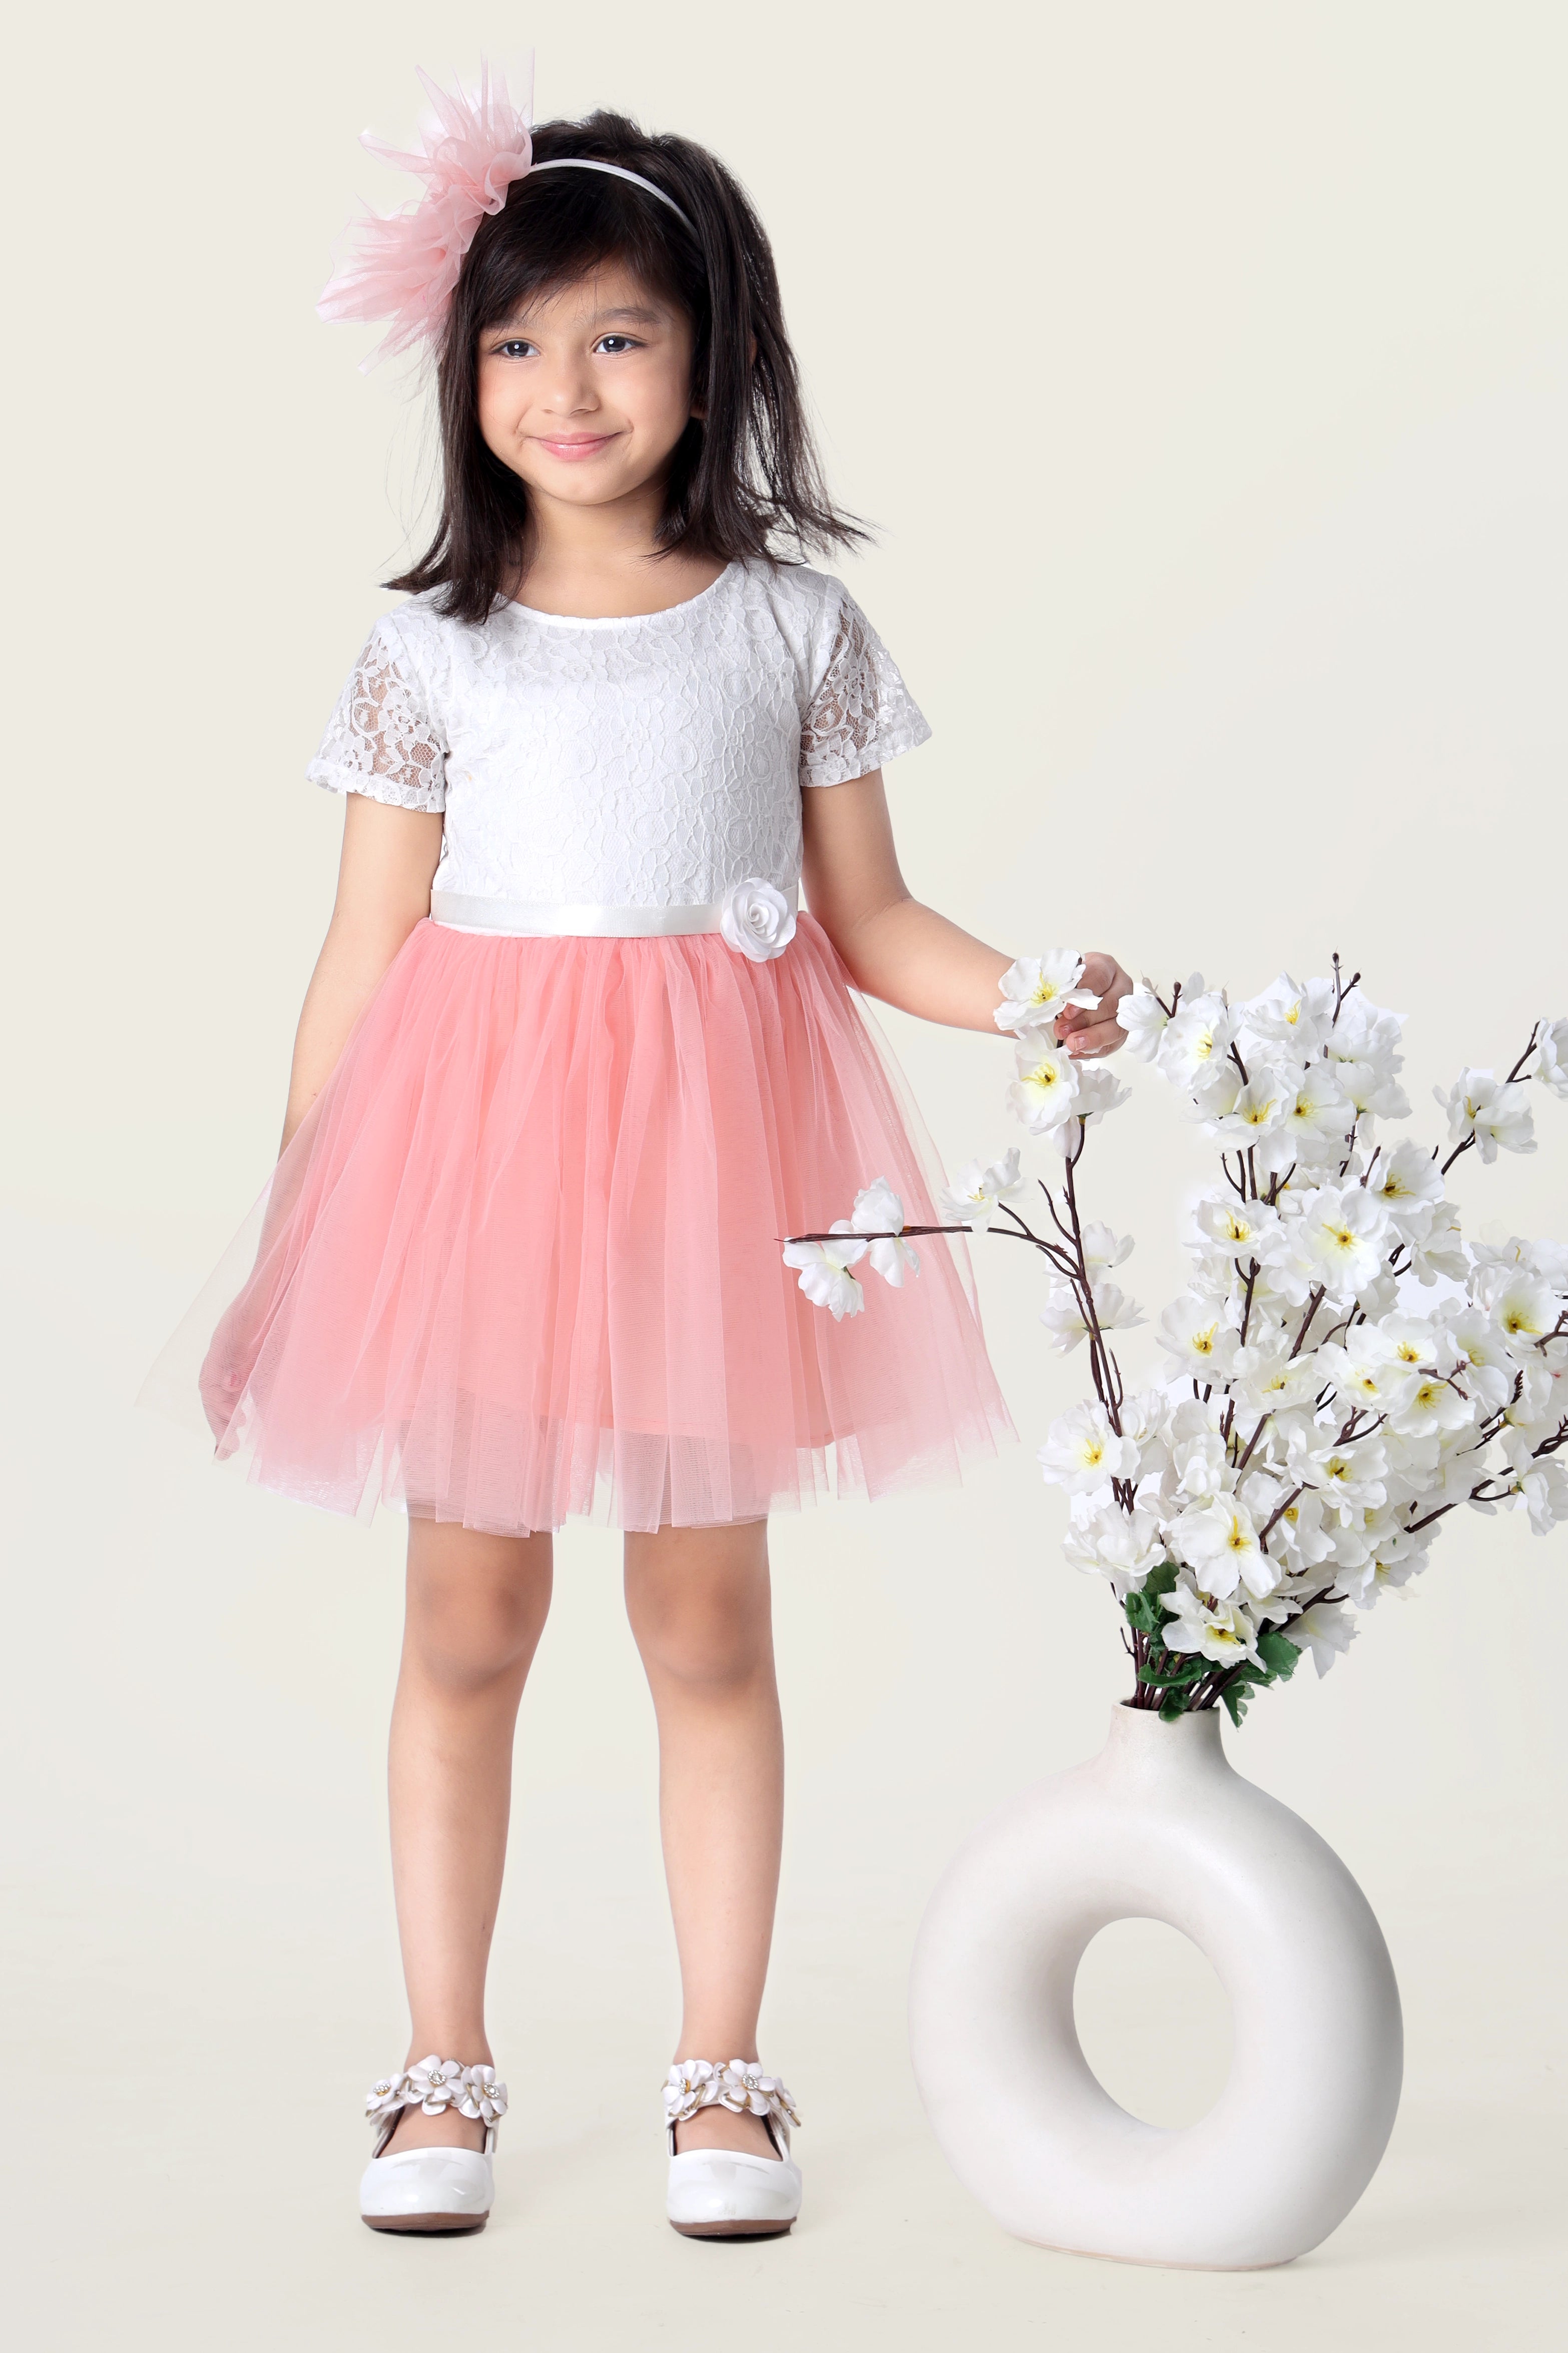 Charming Frock for Lil Girls